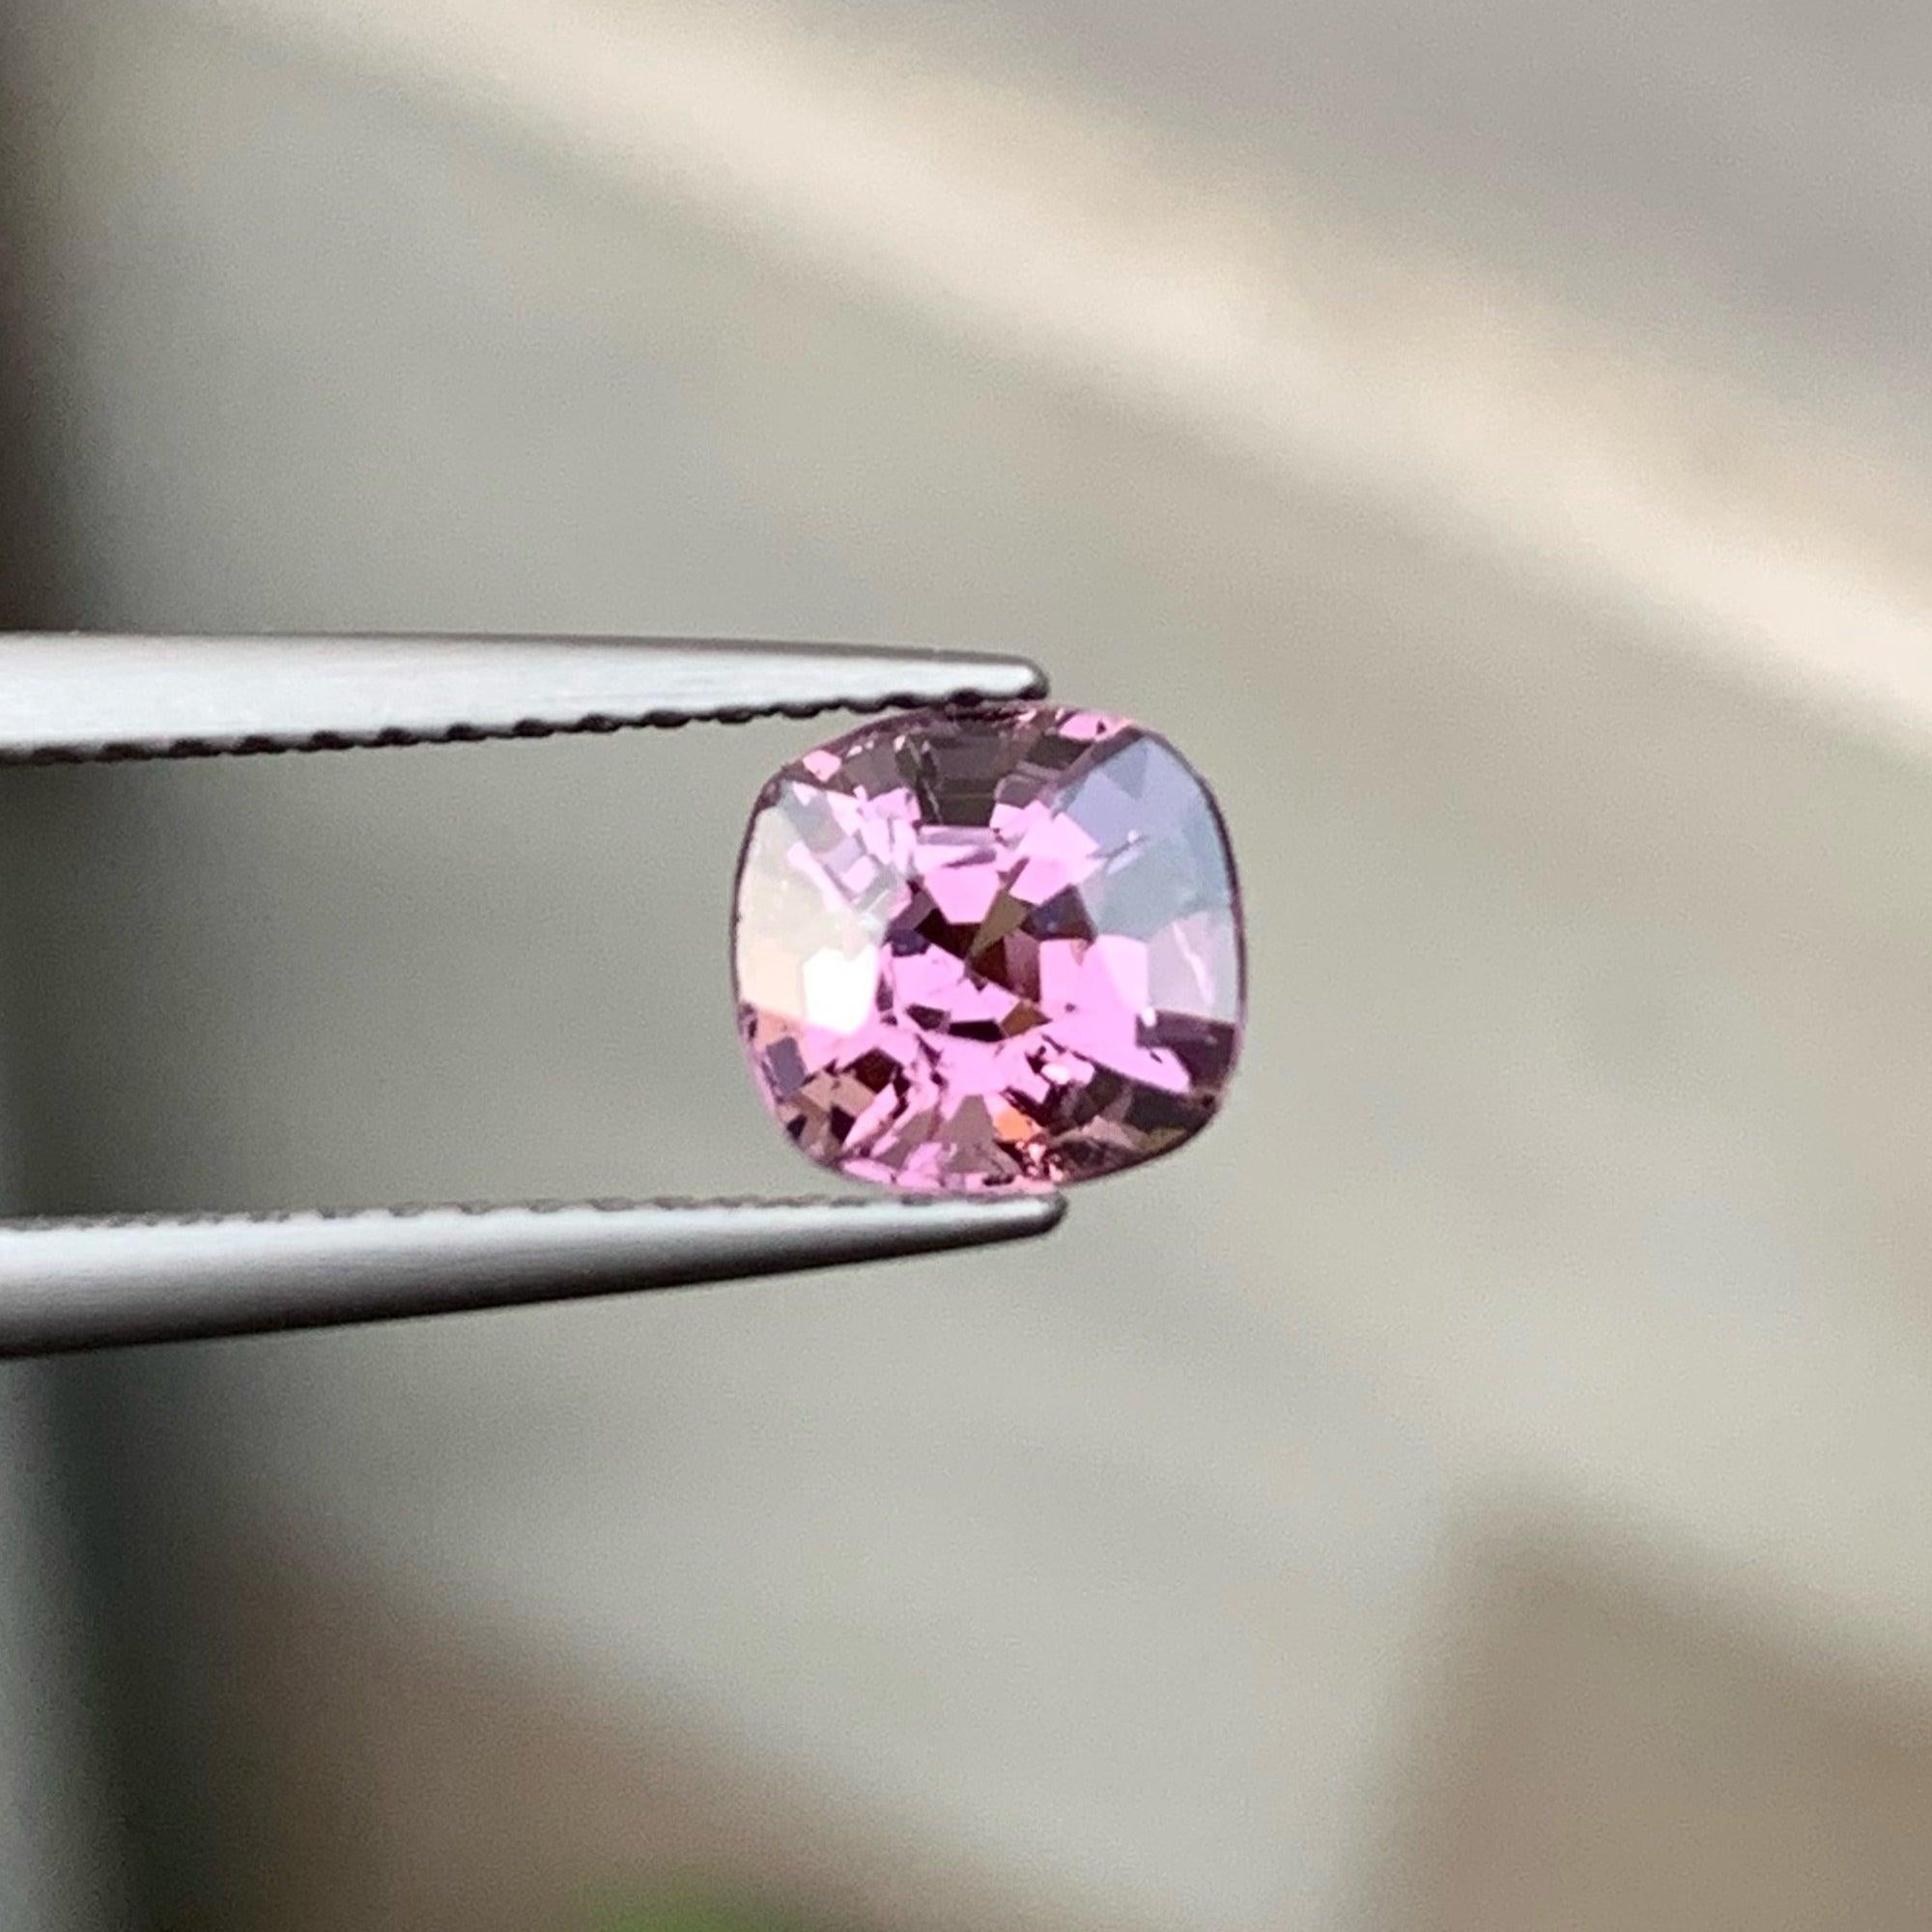 Gorgeous Purplish Pink Loose Spinel , Available For Sale At Wholesale Price Natural High Quality 1.40 carats Vvs Clarity Natural Spinel from Burma.

Product Information:
GEMSTONE TYPE	Gorgeous Purplish Pink Loose Spinel
WEIGHT	1.40